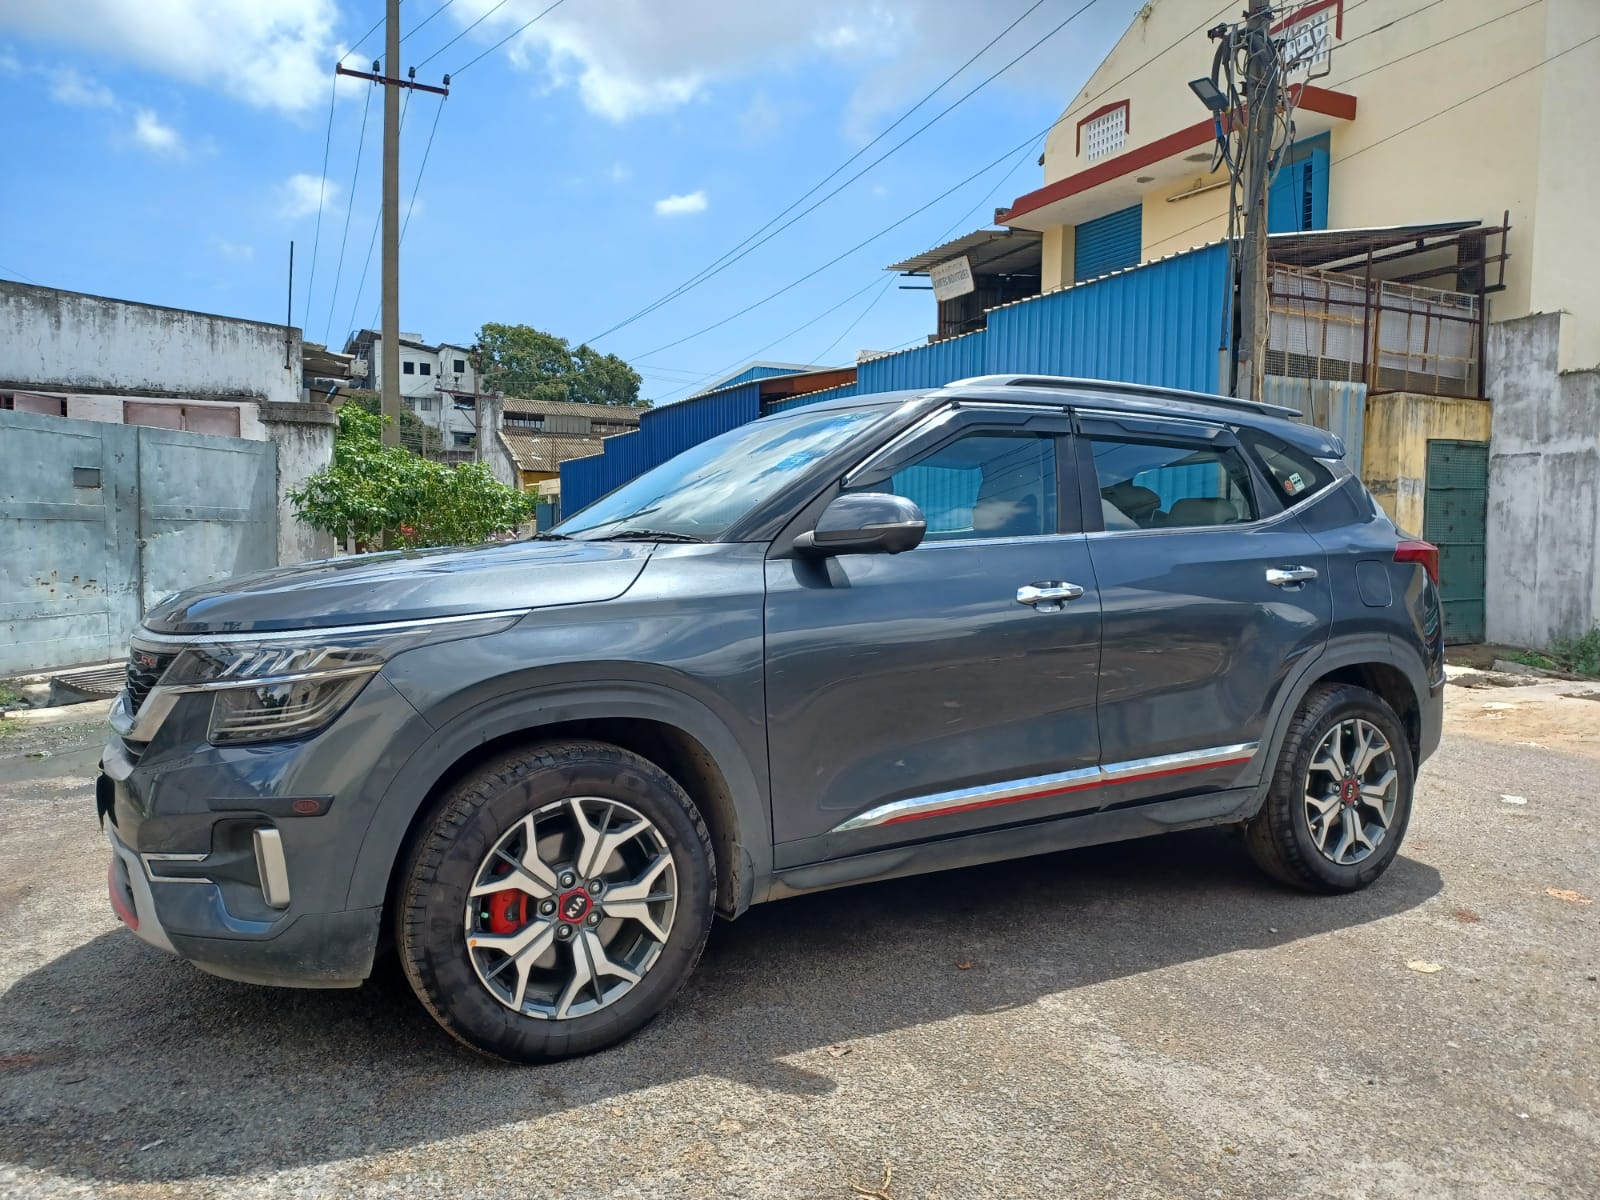 4664-for-sale-Kia-Seltos-Petrol-First-Owner-2020-PY-registered-rs-1525000